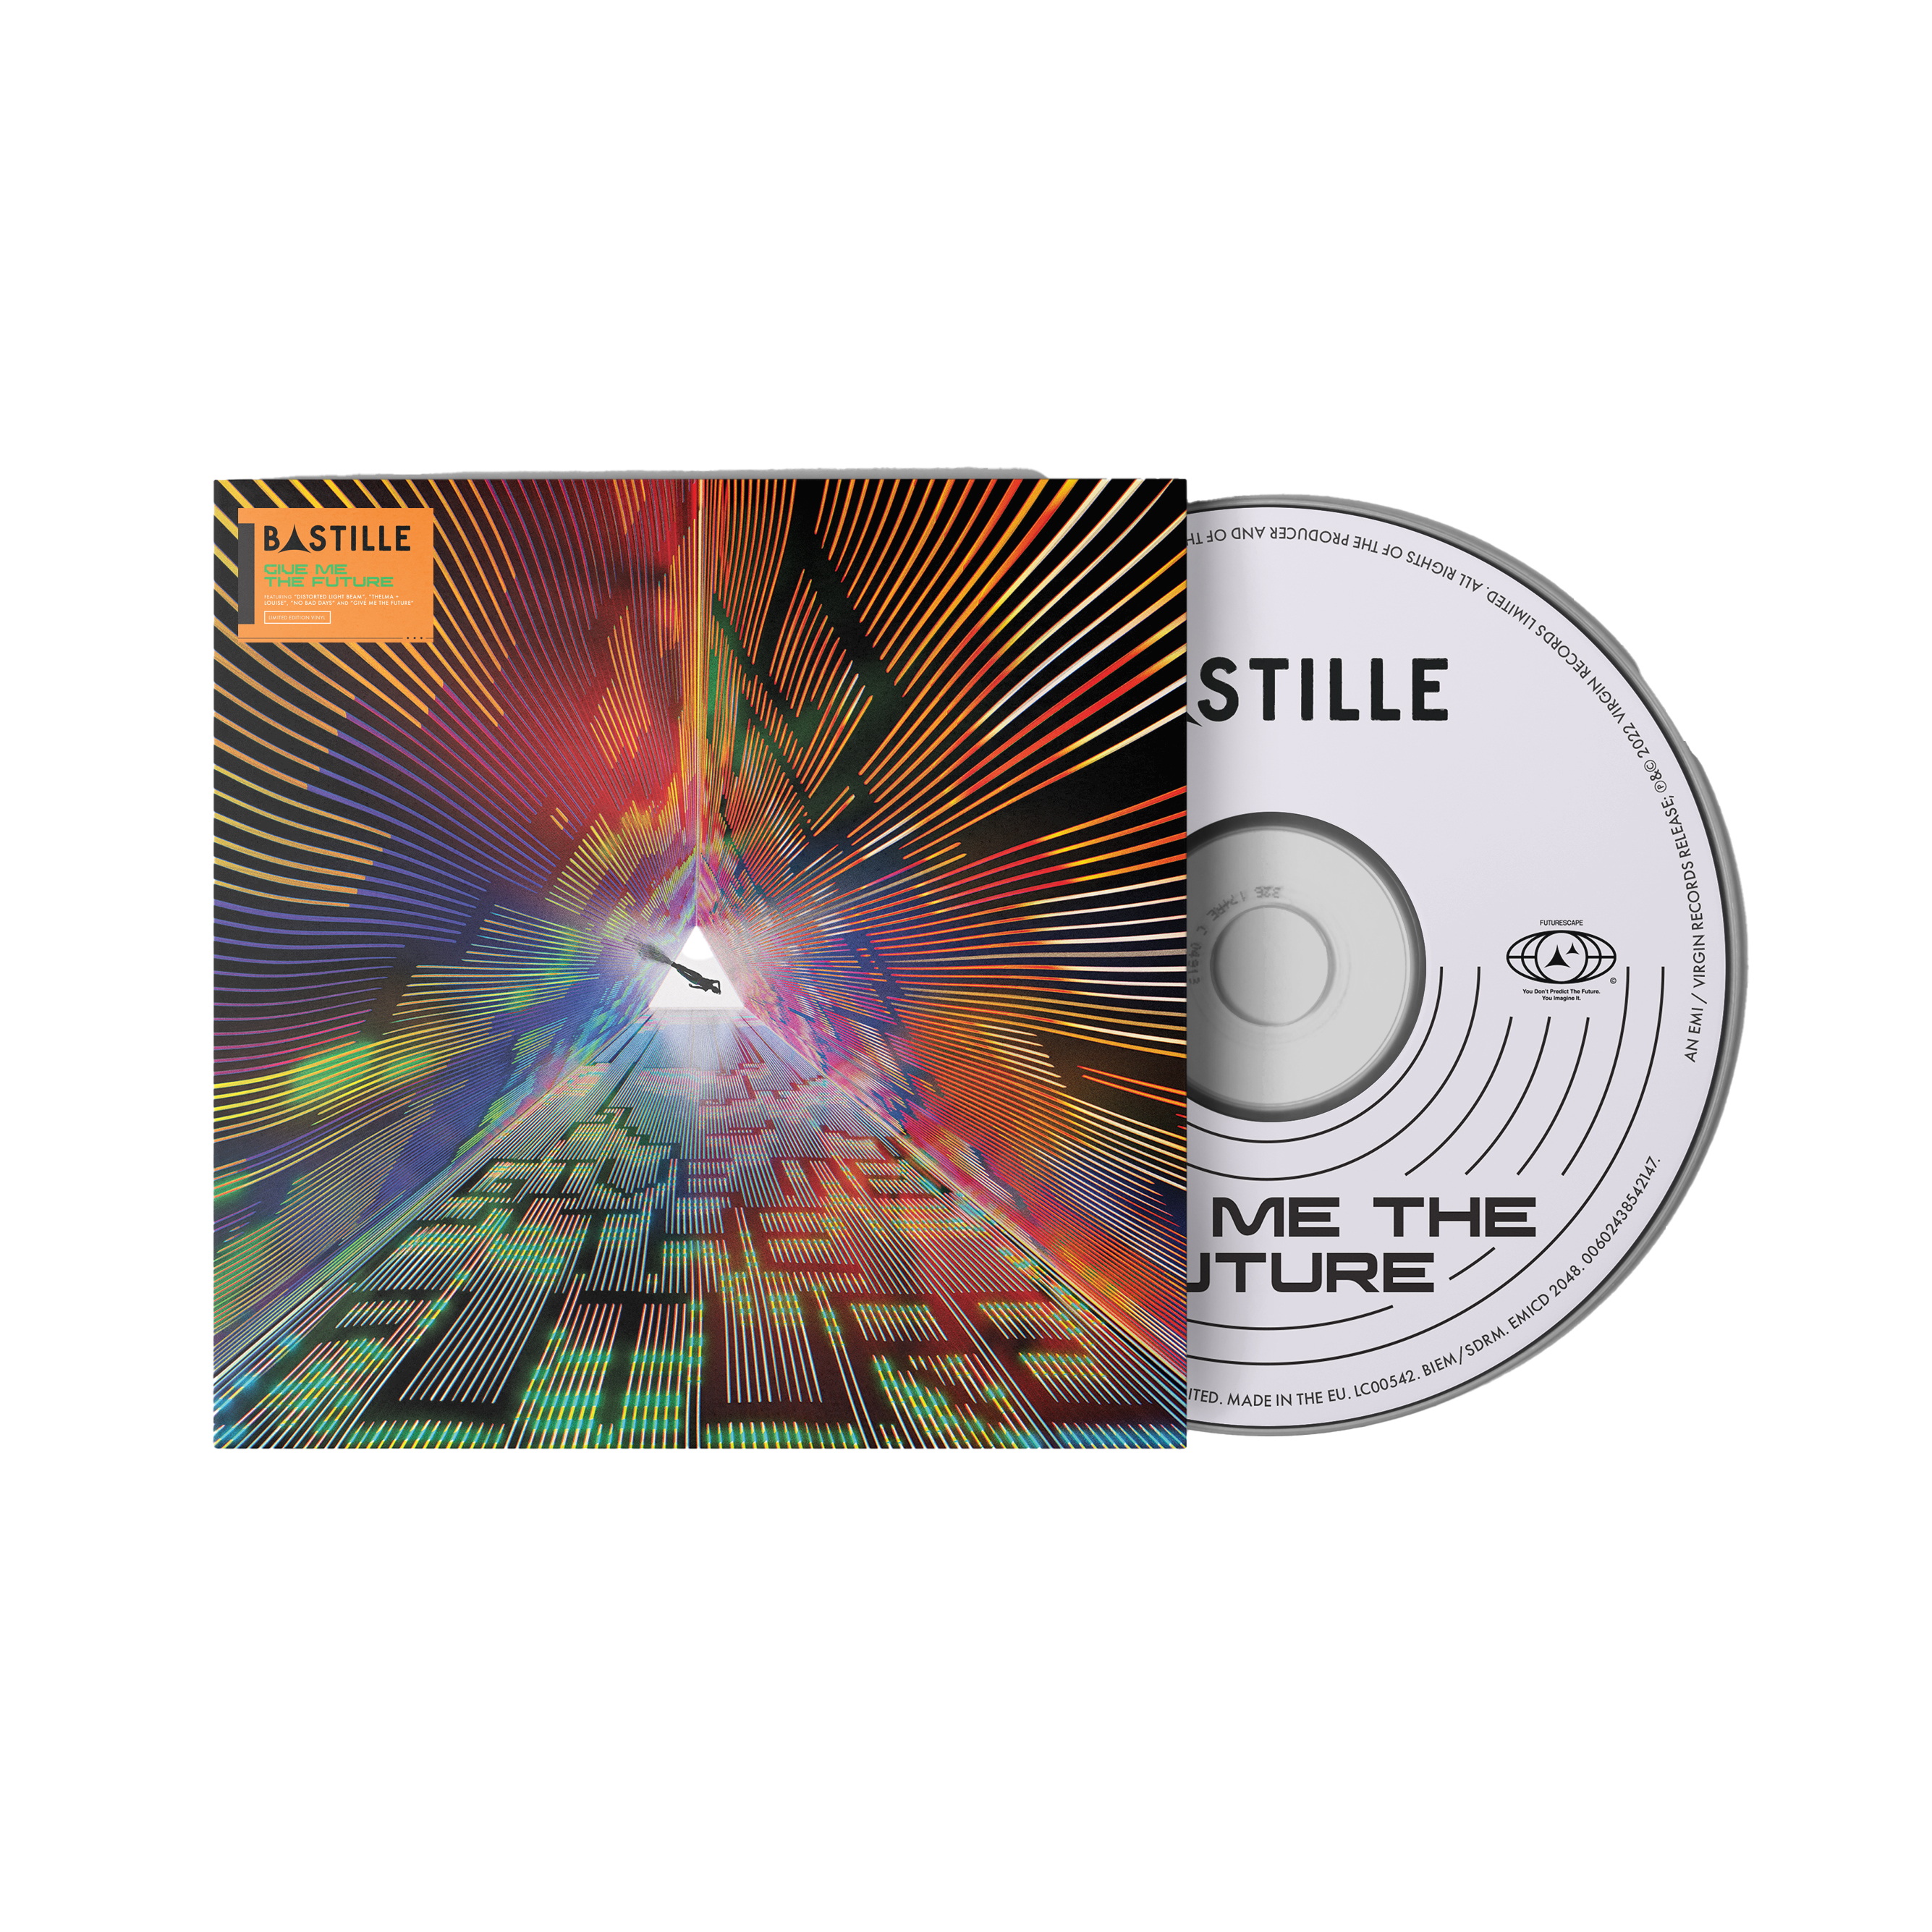 Bastille - Give Me The Future: CD